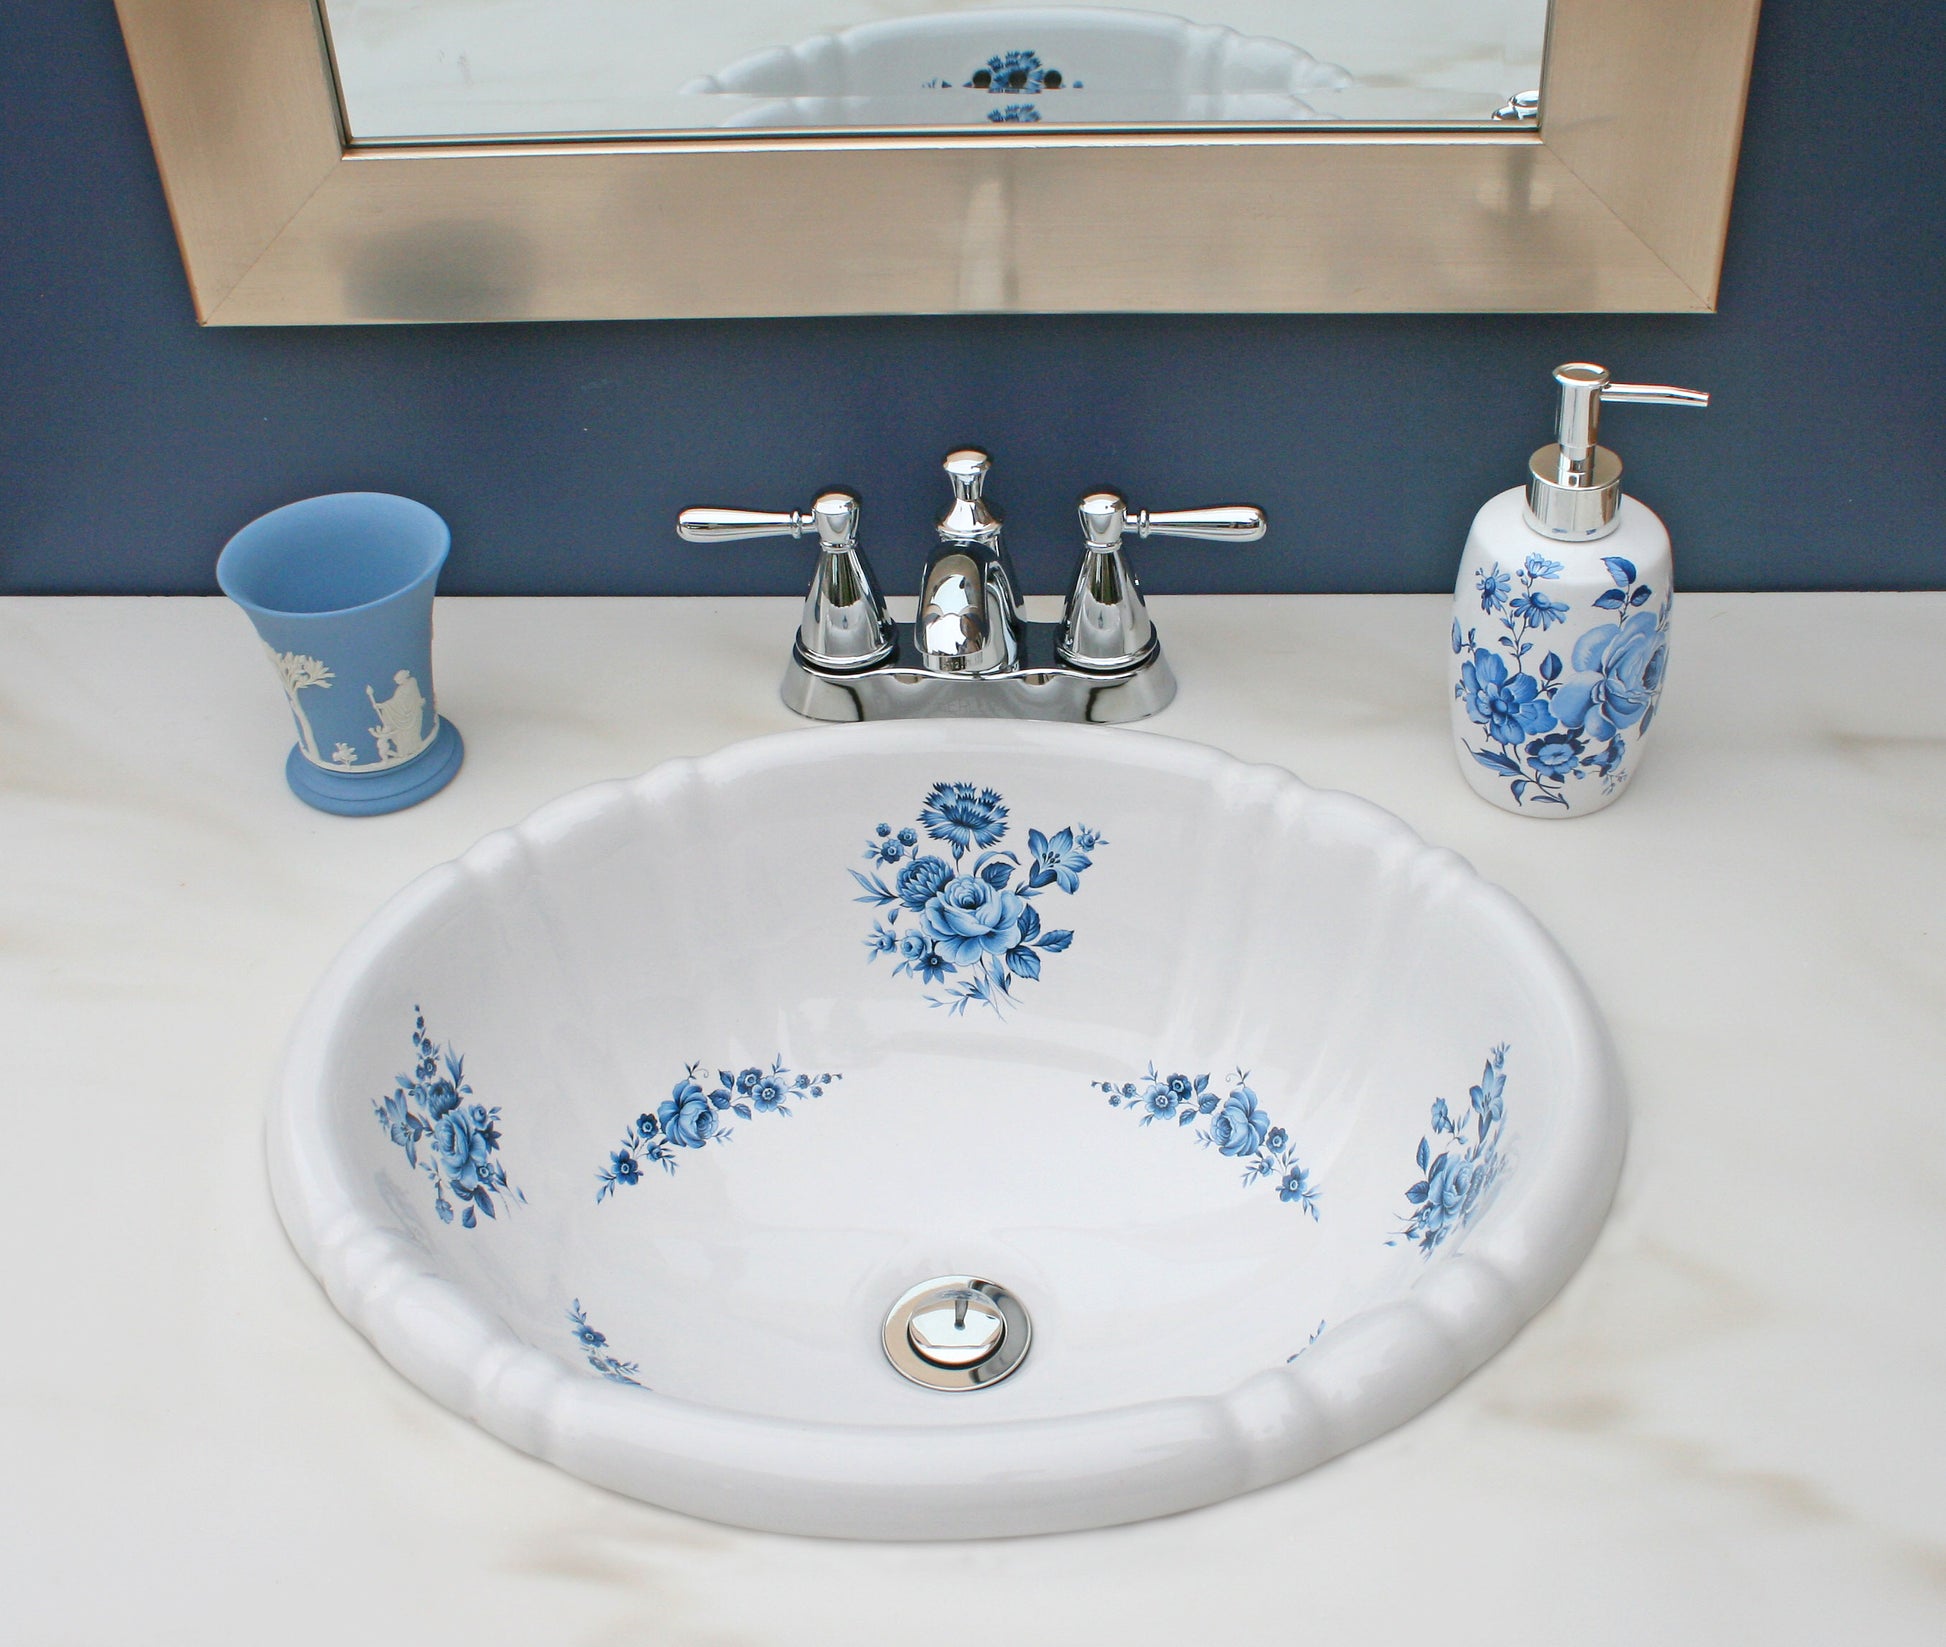 Navy blue powder room with Edgewood accents and blue roses painted sink